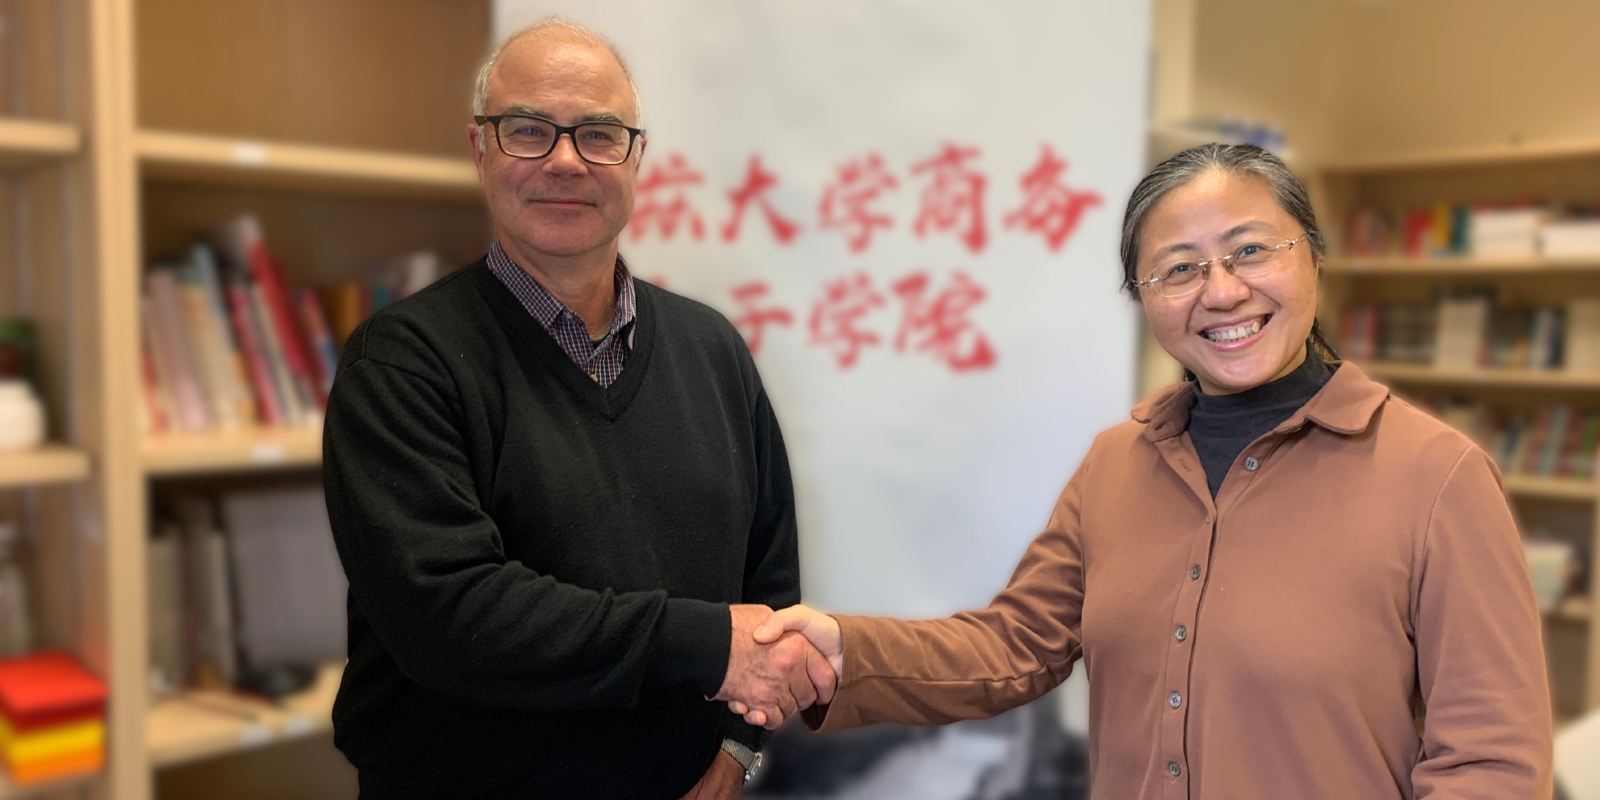 The Business Confucius Institute welcomes a new Executive Director